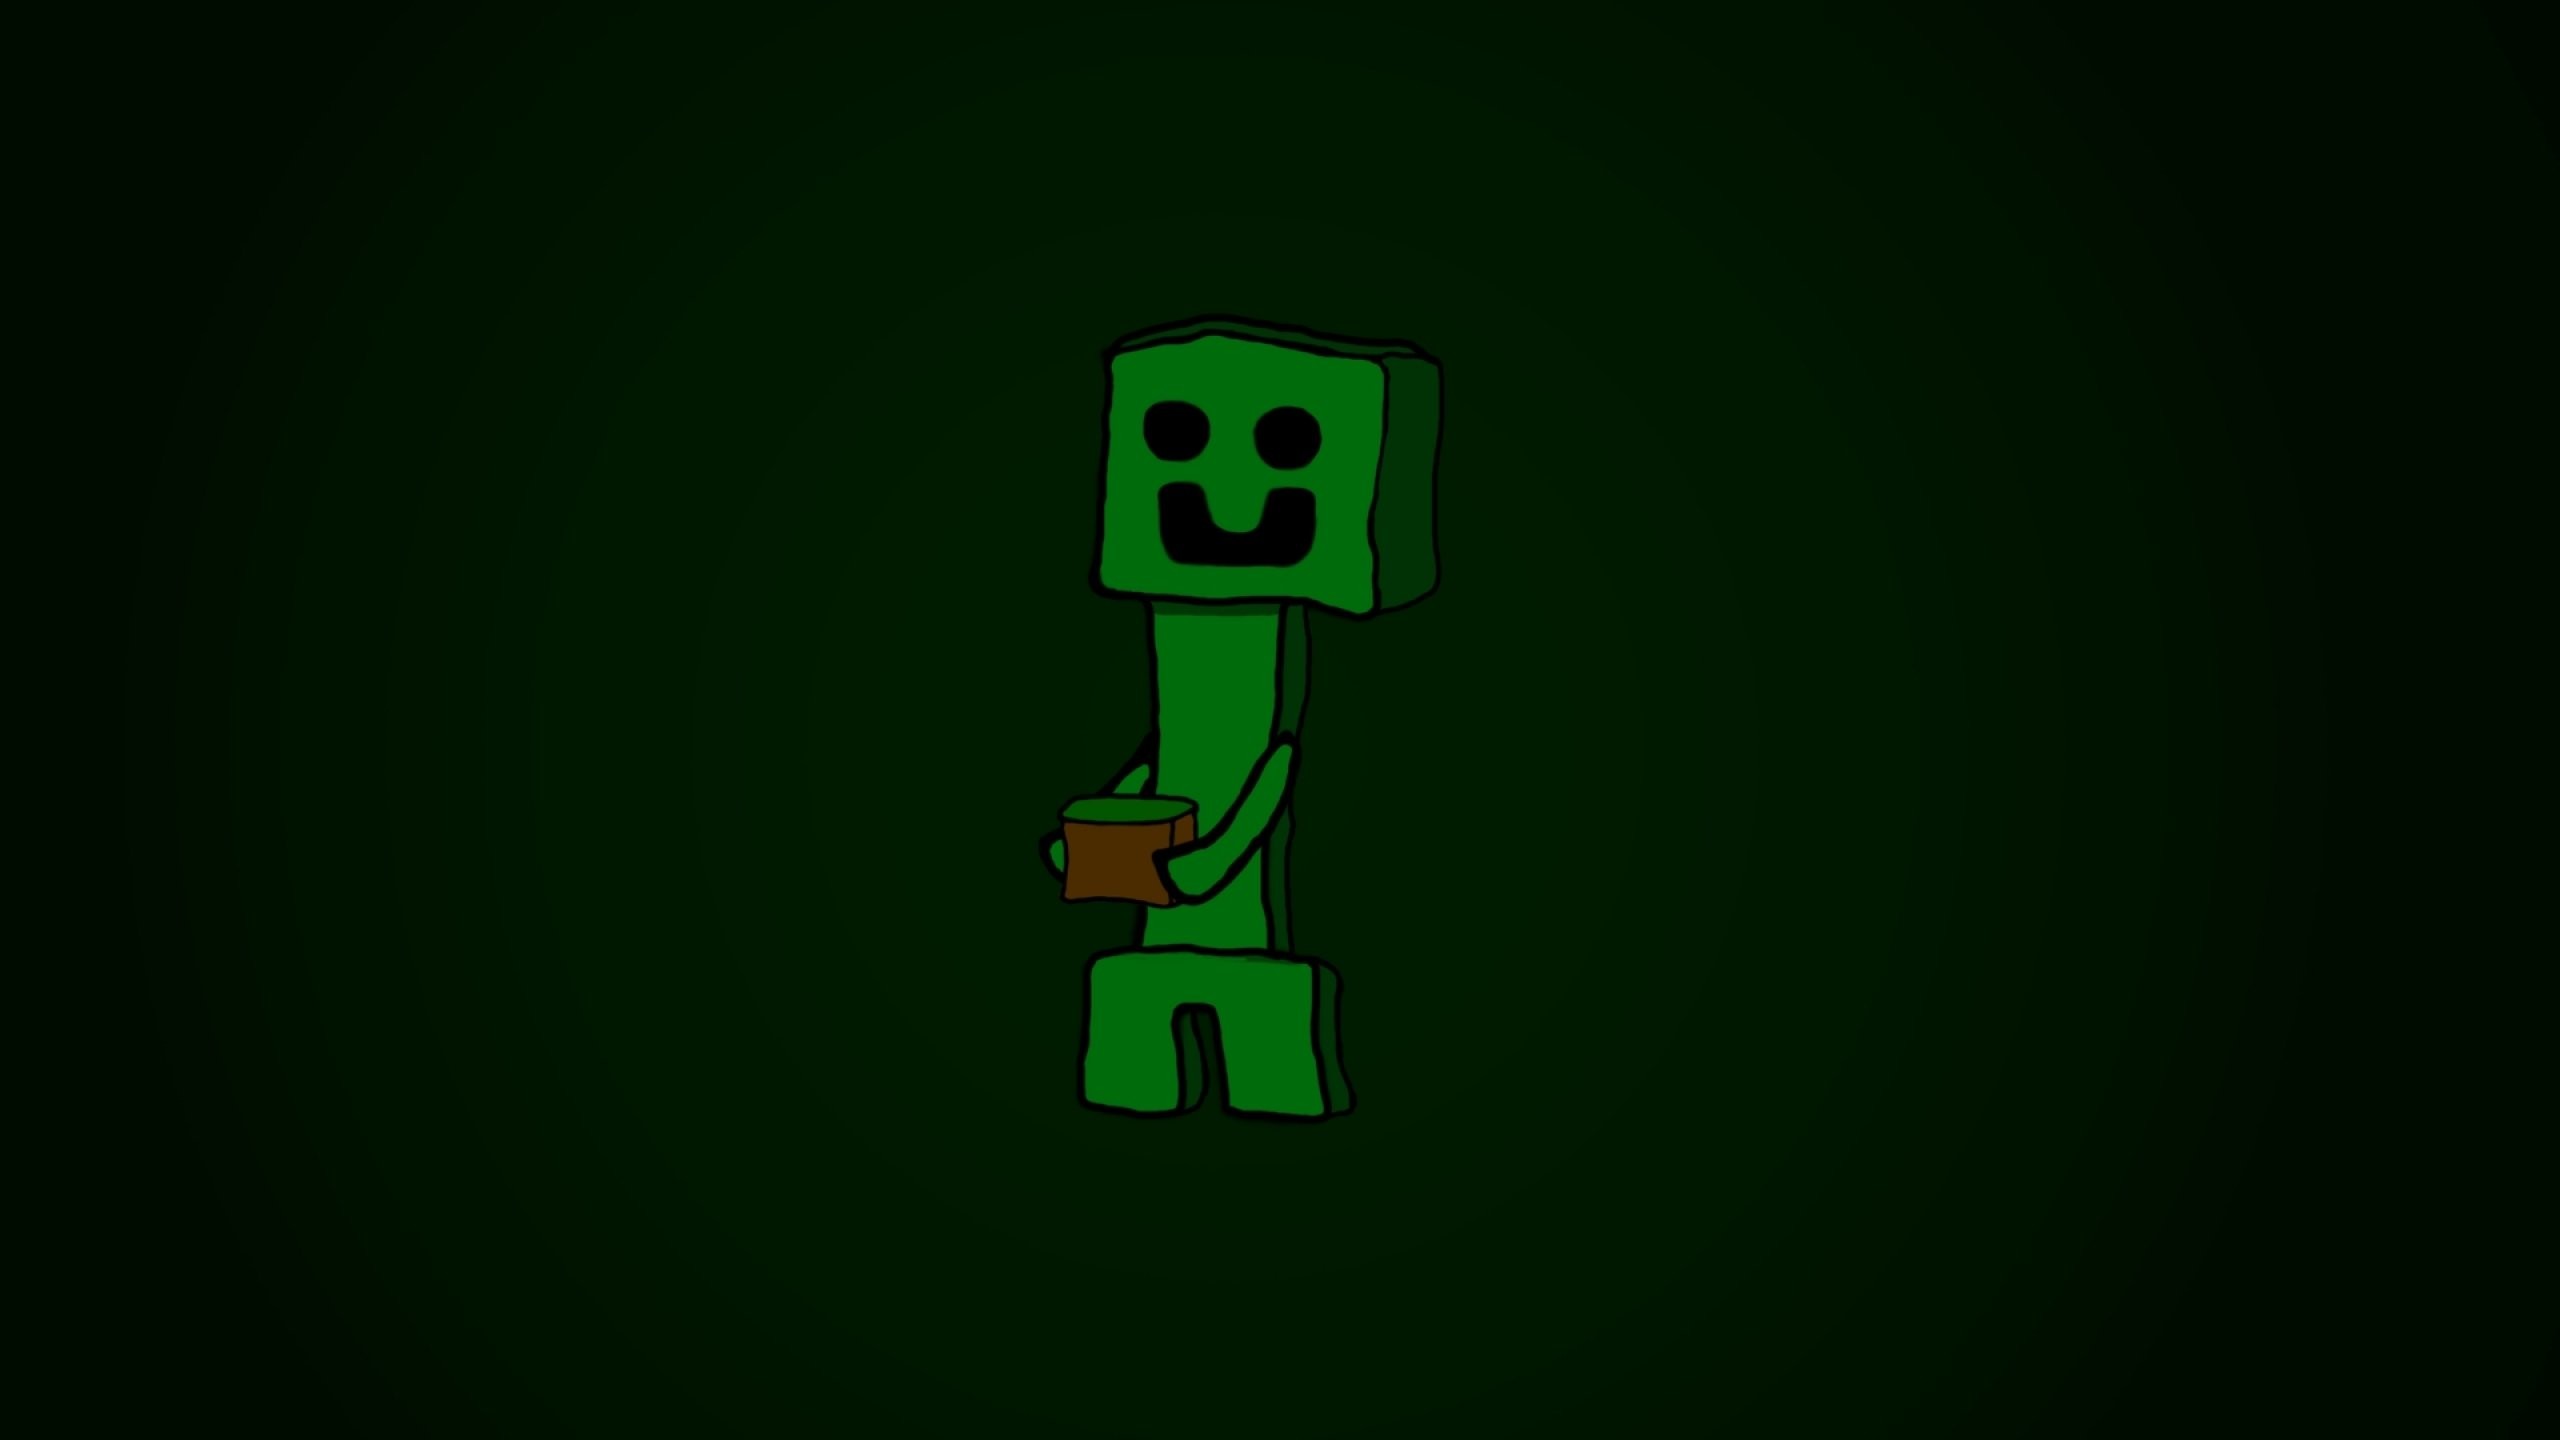 2560x1440 ... Images of Epic Minecraft Wallpaper Creeper - #SC ...